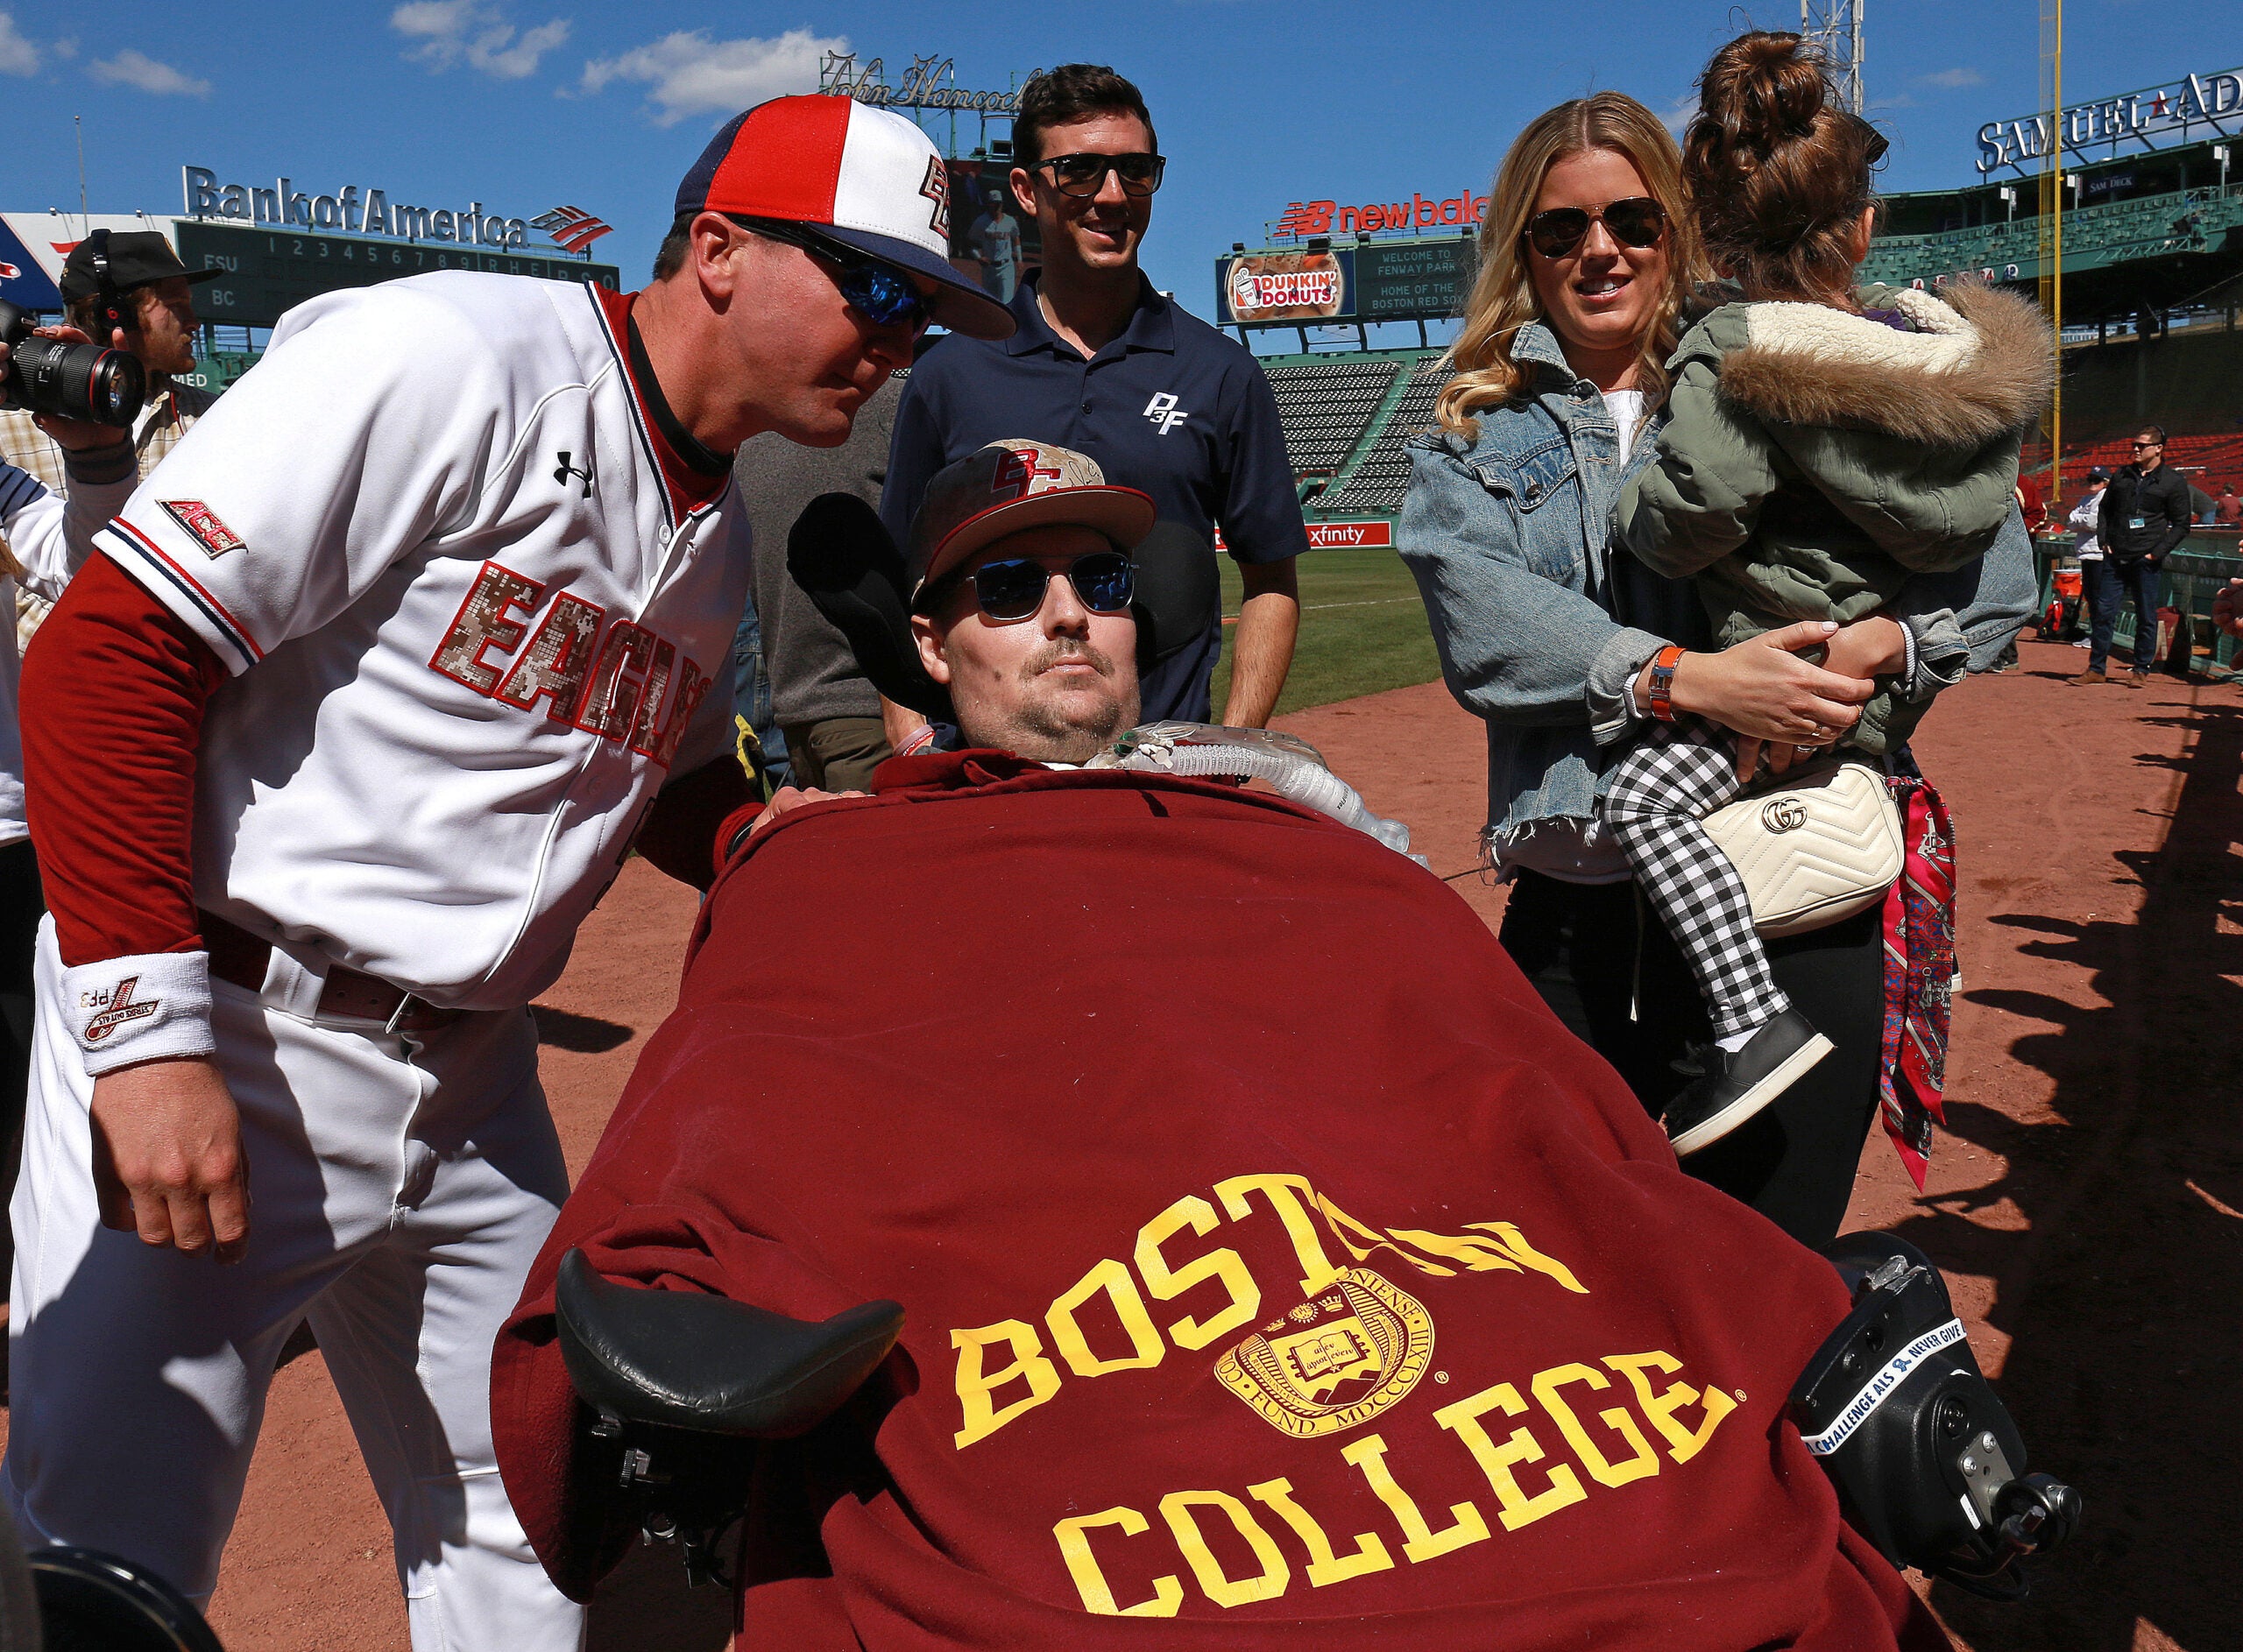 Boston Red Sox honor Pete Frates with customized championship ring